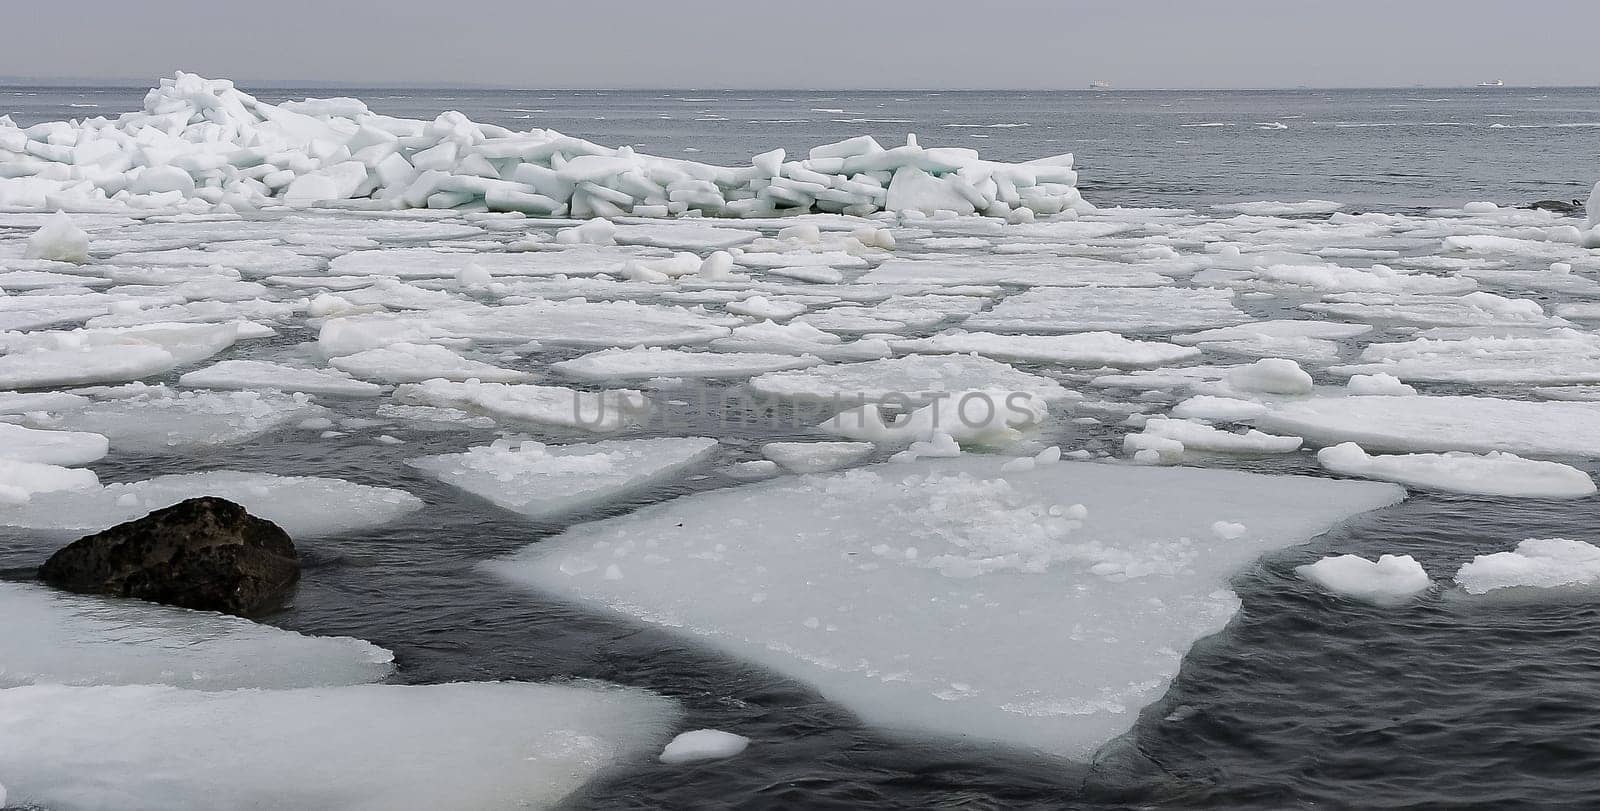 The Black Sea near Odessa is frozen. Ice floes float on the shore